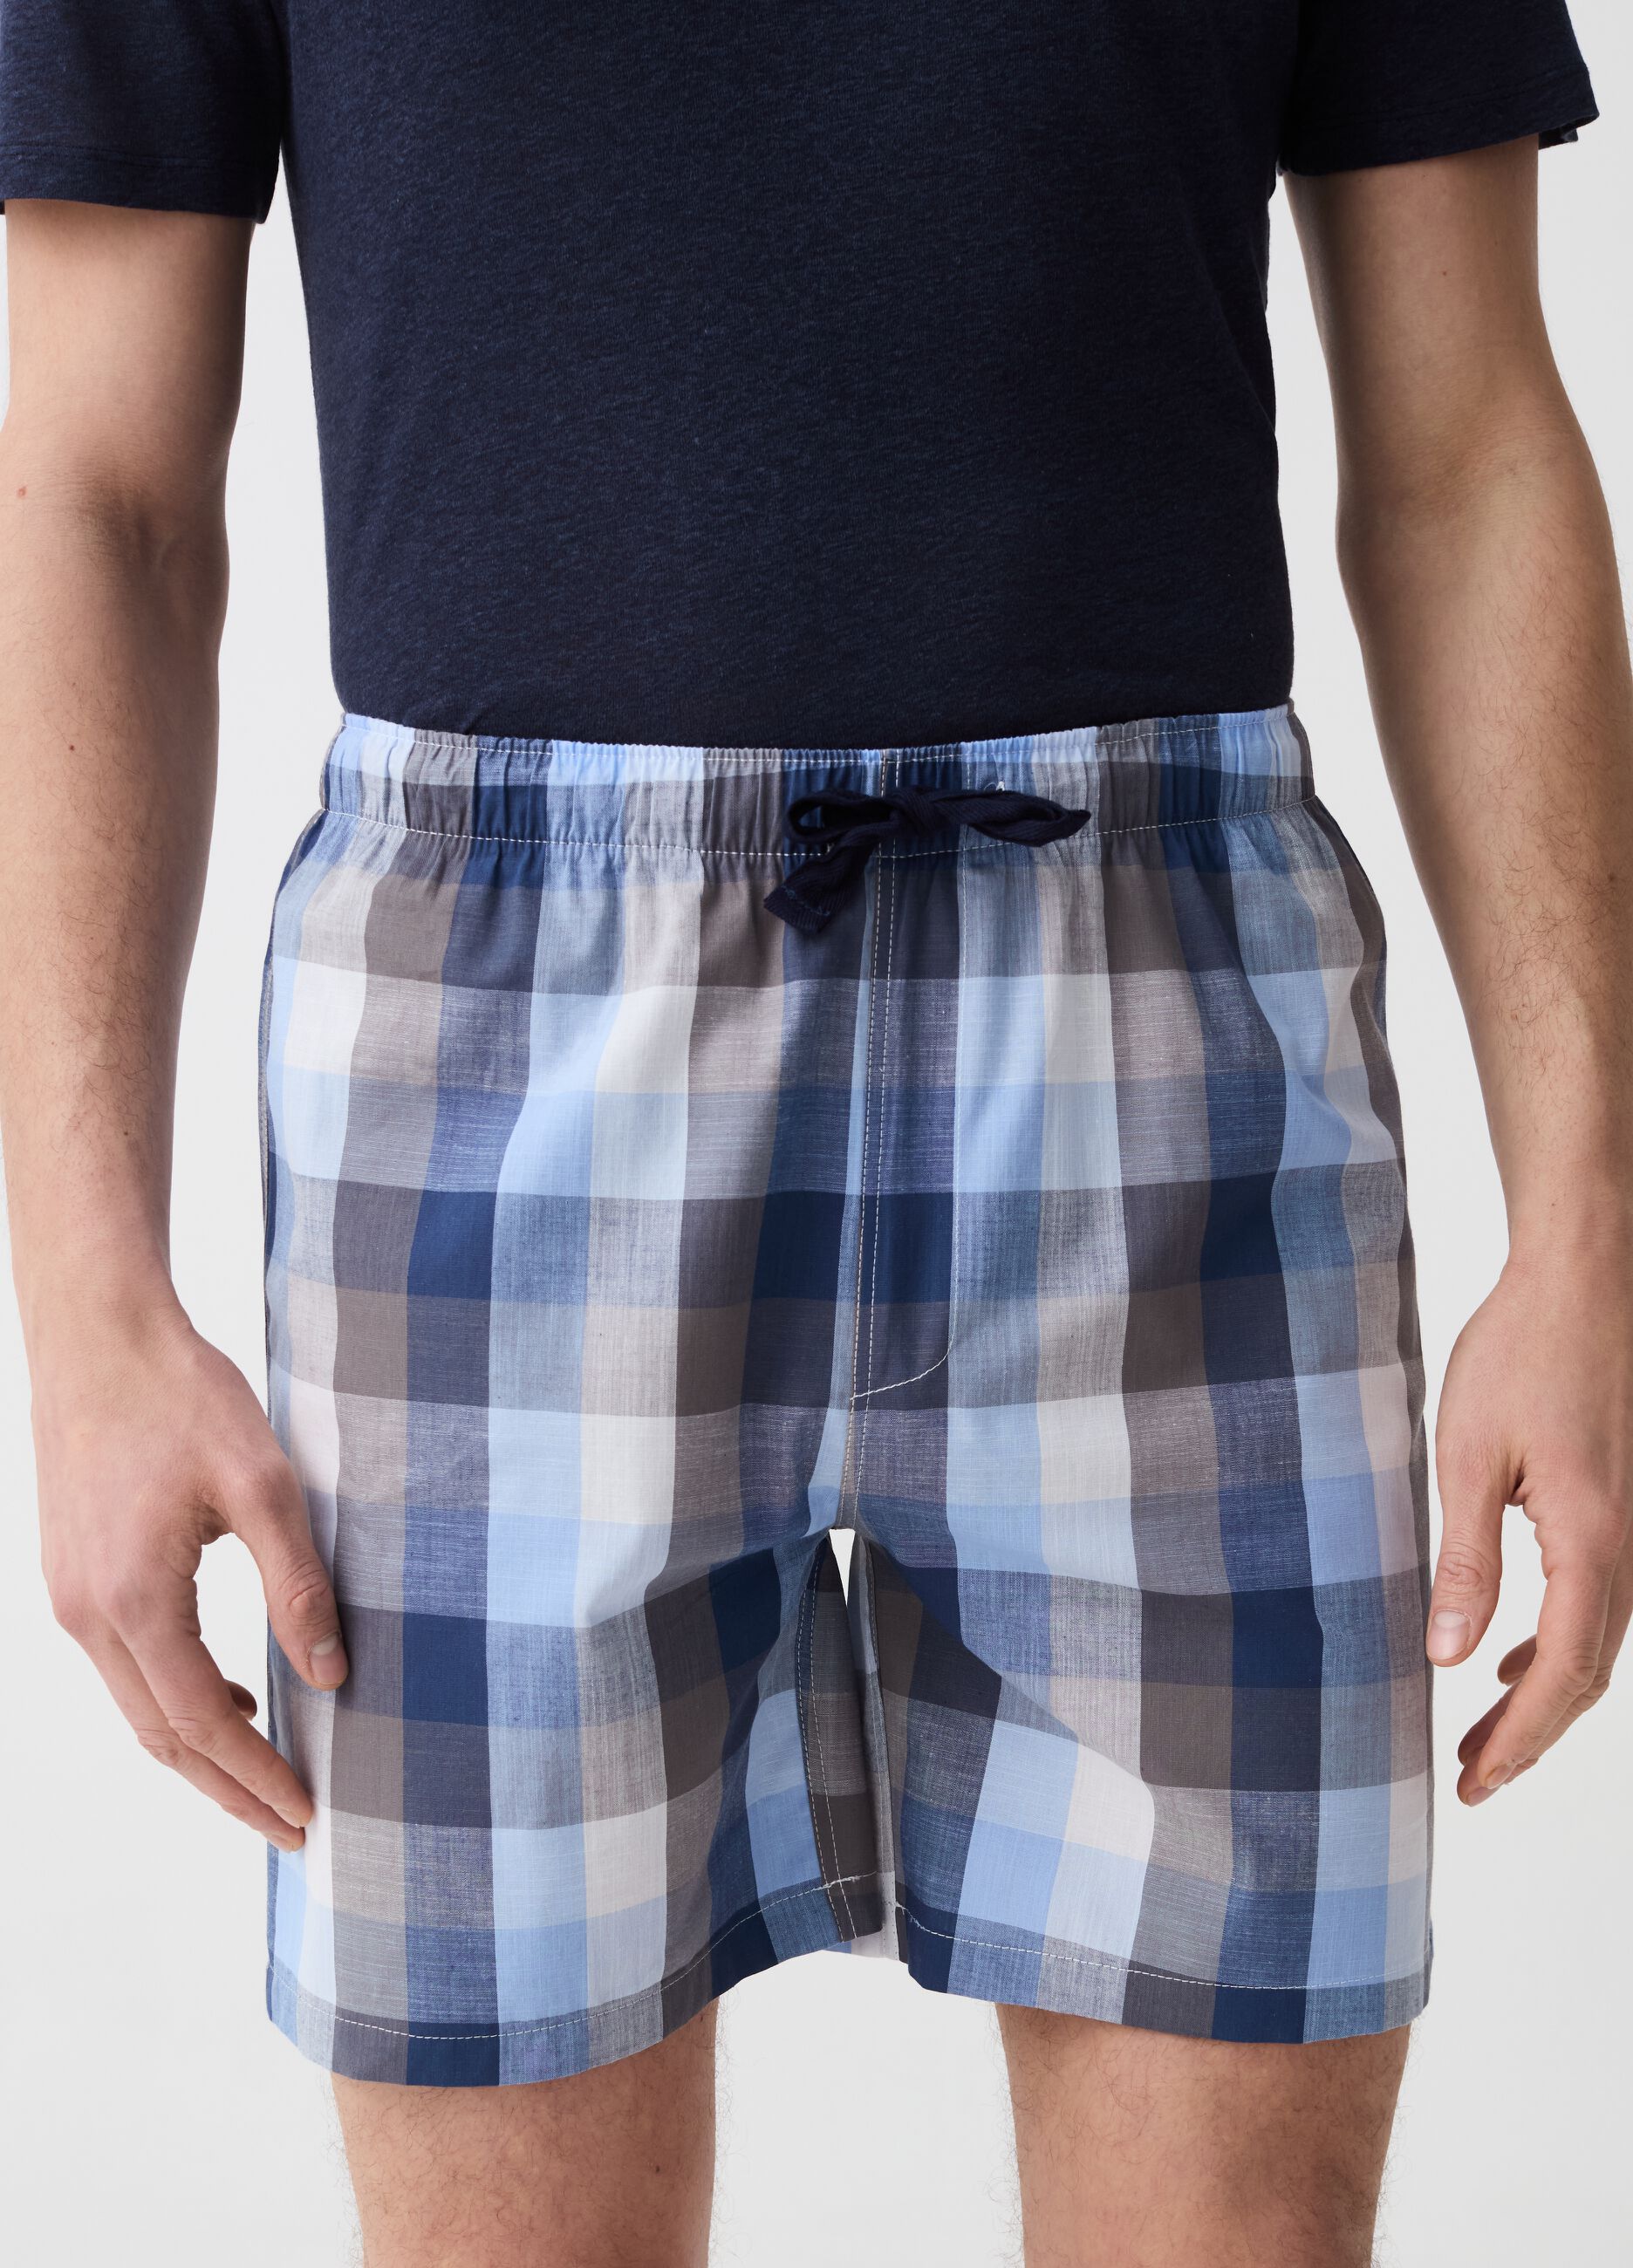 Patterned shorts with drawstring